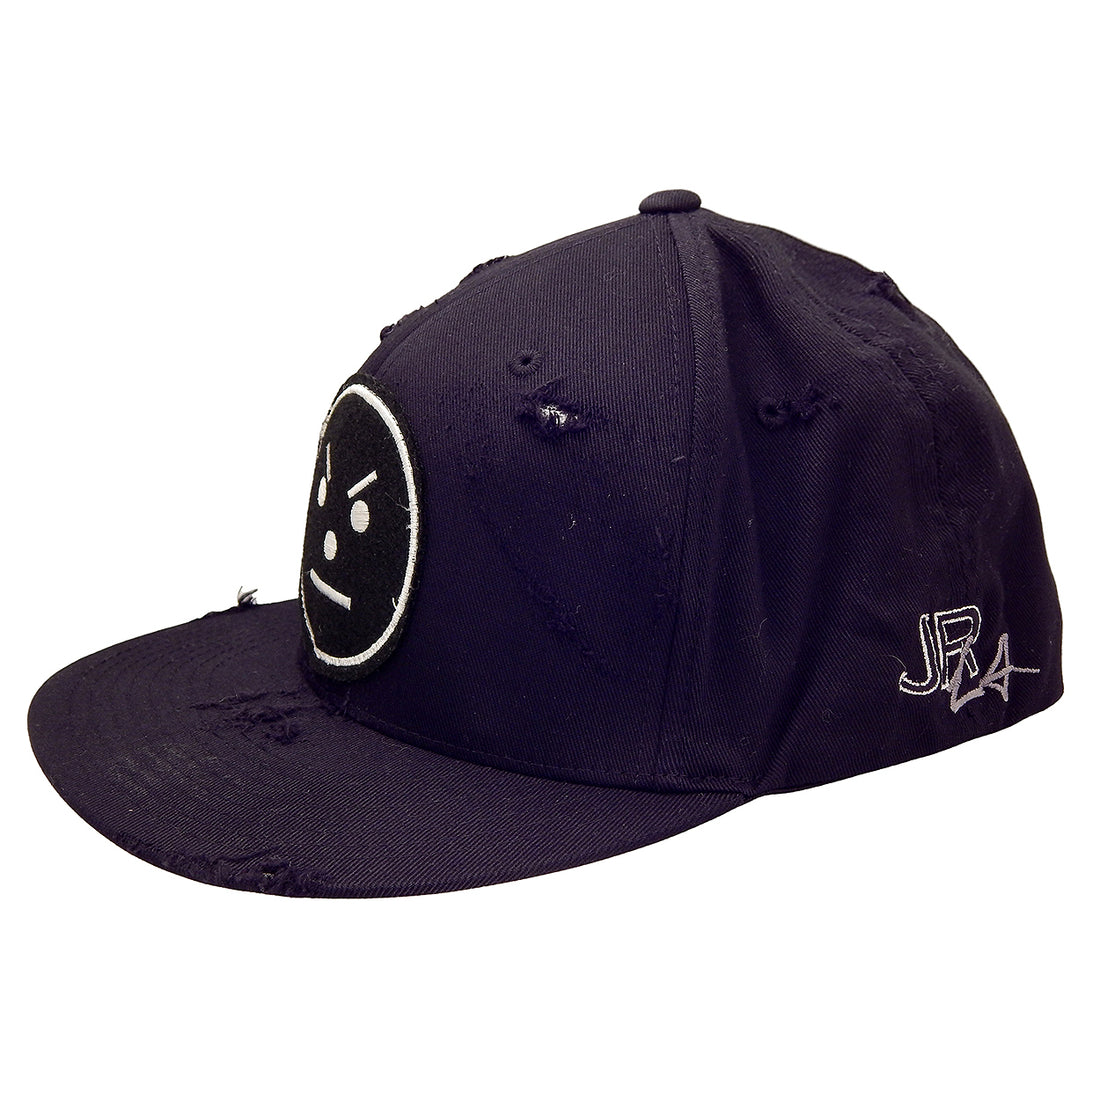 J. Ransom Collection - "SERIOUS SNOWMAN" Flat Billed Hat in Black on Black